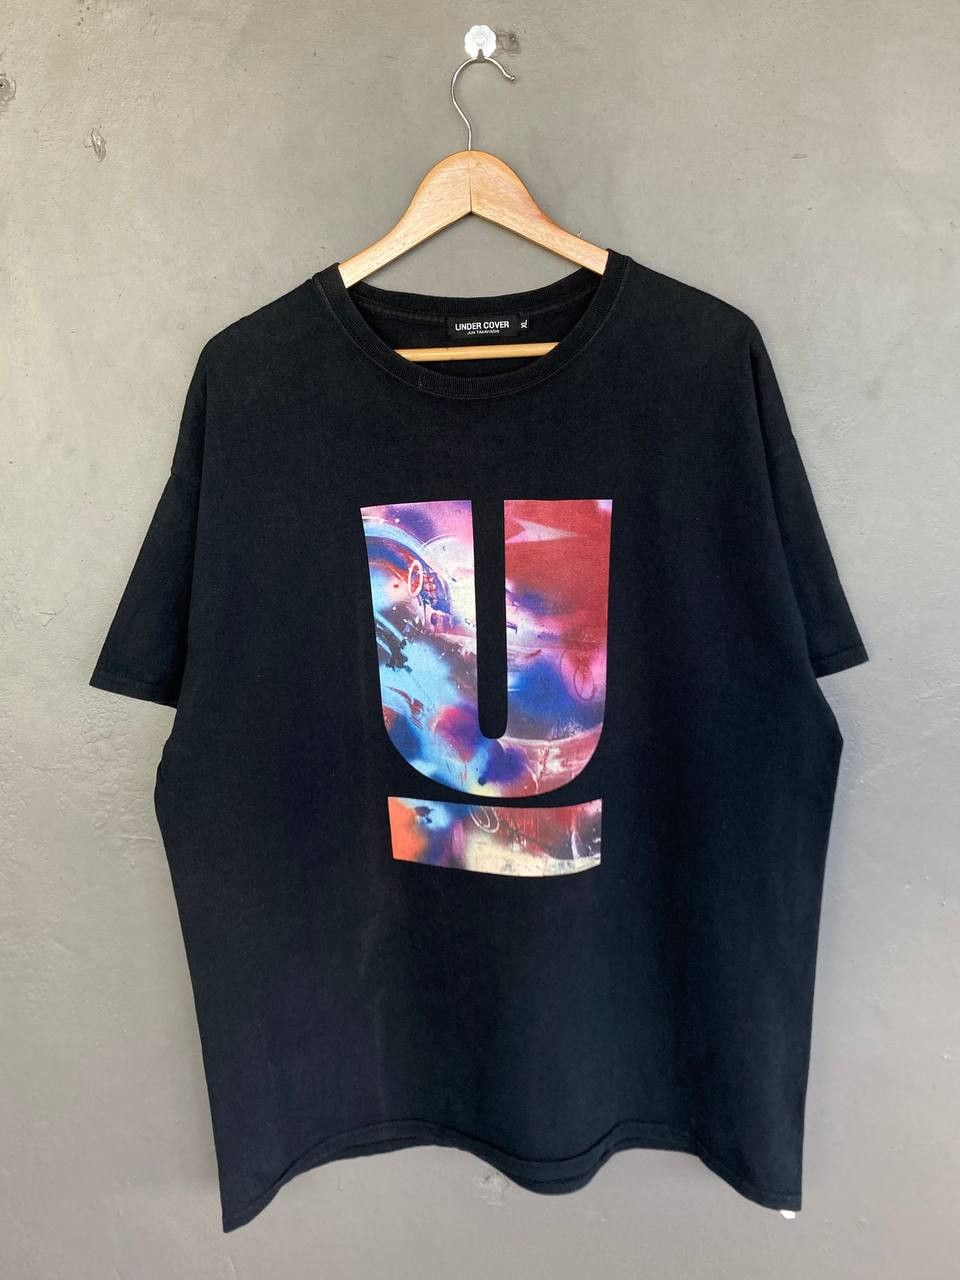 SS19 Undercover x Futura “The Kinship Issue” Tee - 1